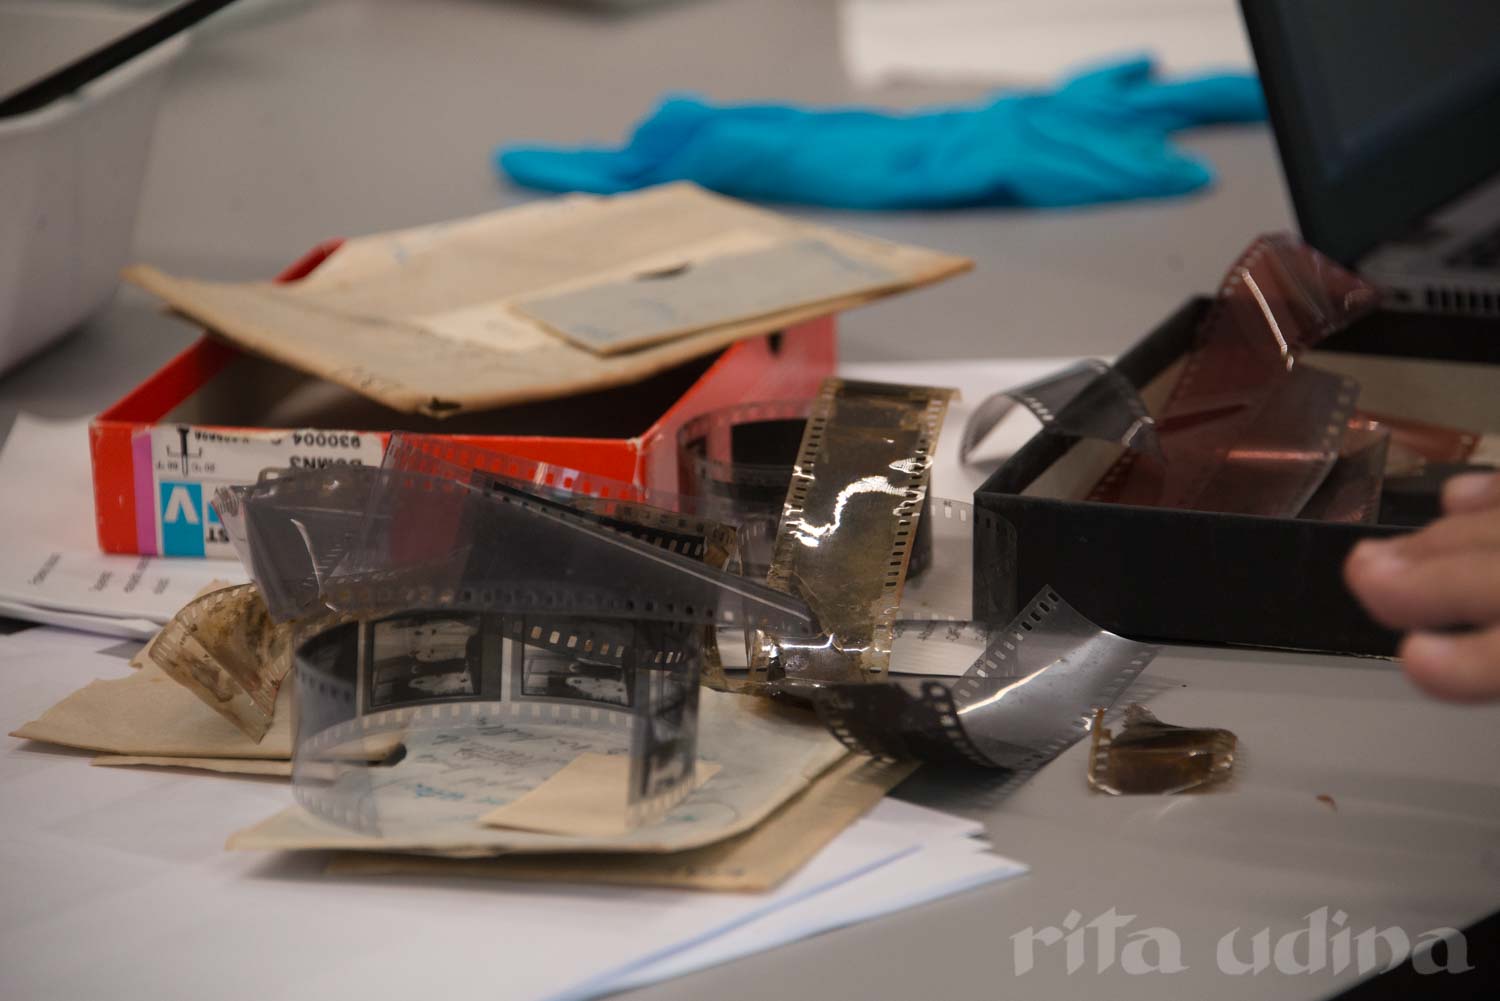 Nitrate, acetate and polyester supports for films. Course "Identification, preservation and conservation of photographs"